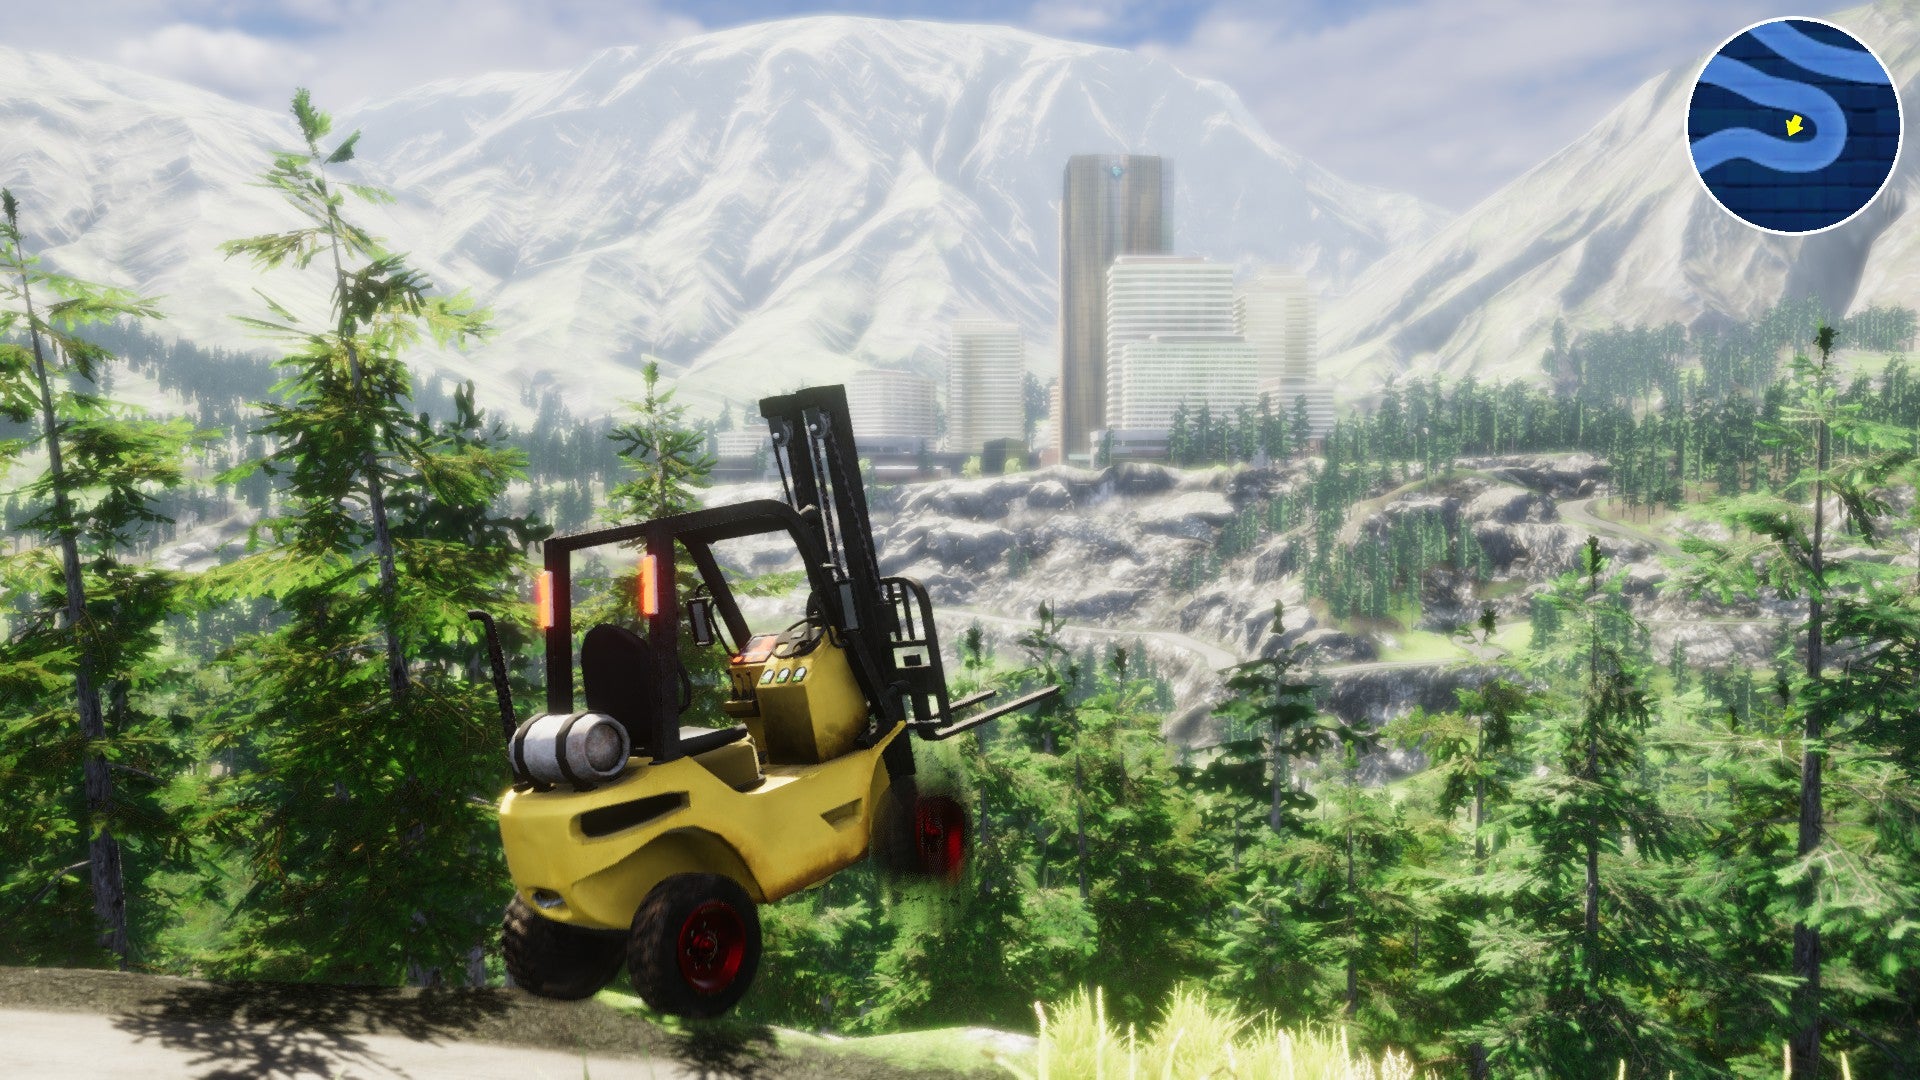 The forklift in Forklift Load making a jump, in front of a panoramic view of a city nestled in a valley